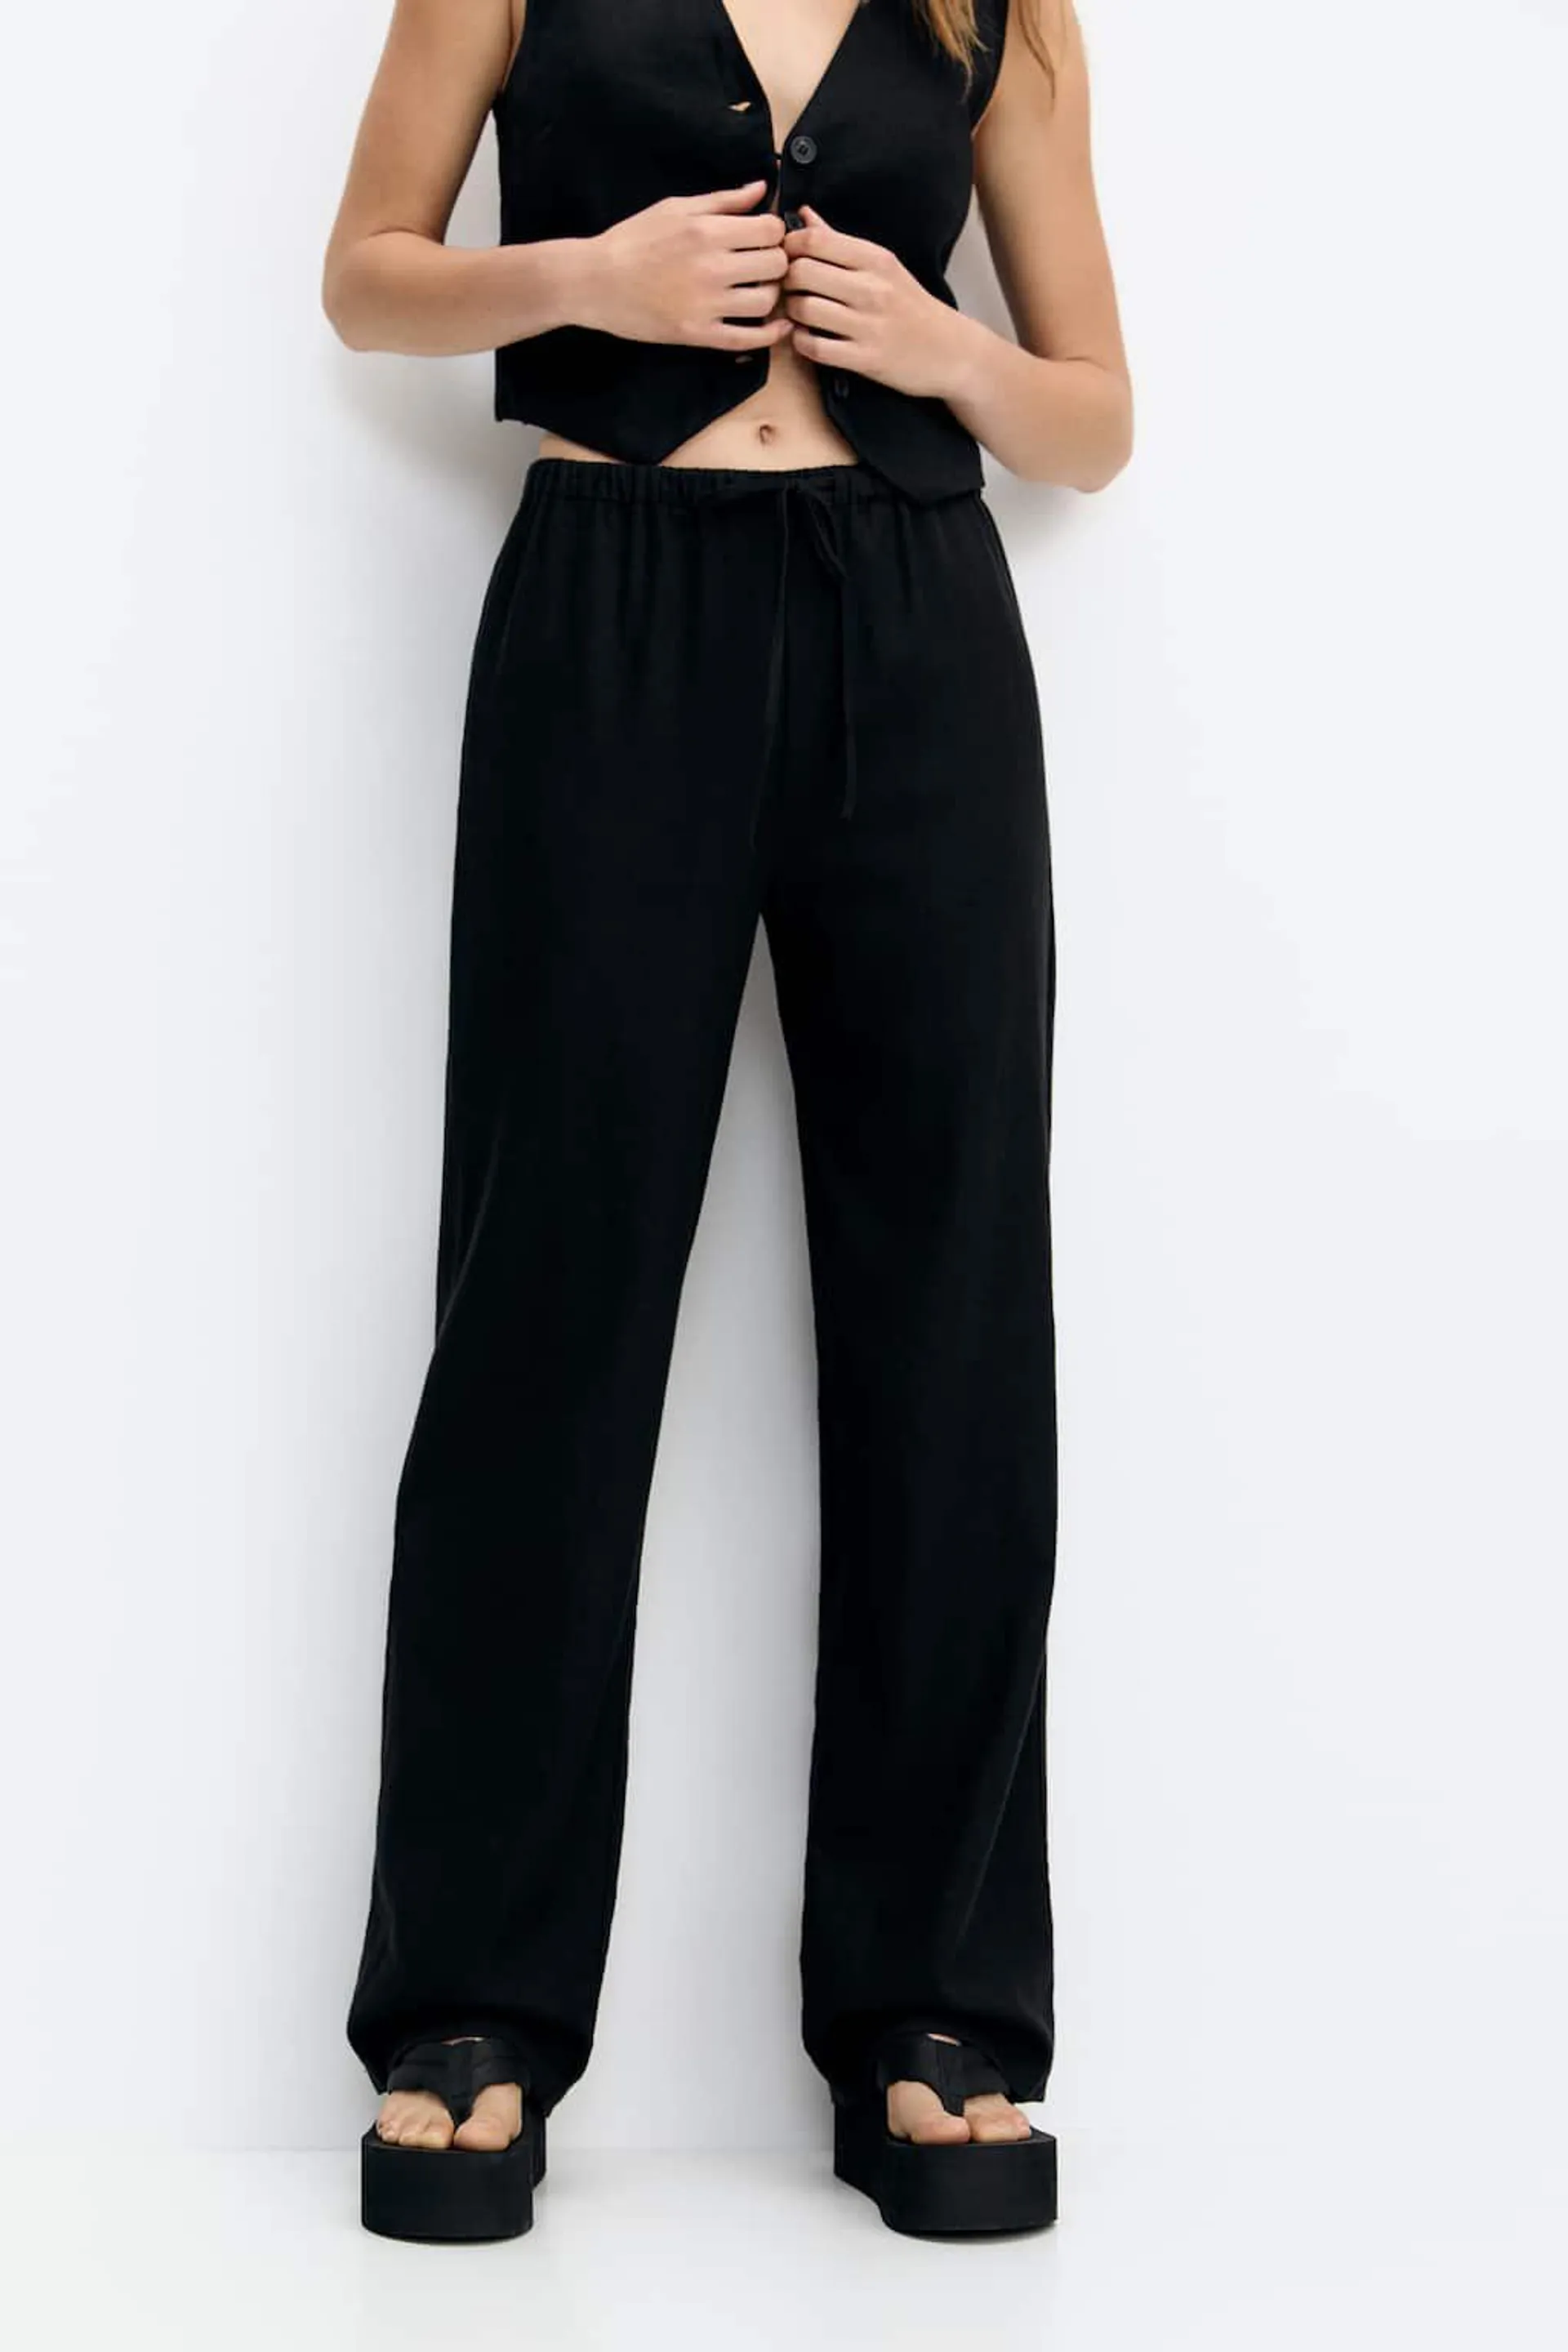 FLOWING RUSTIC TROUSERS